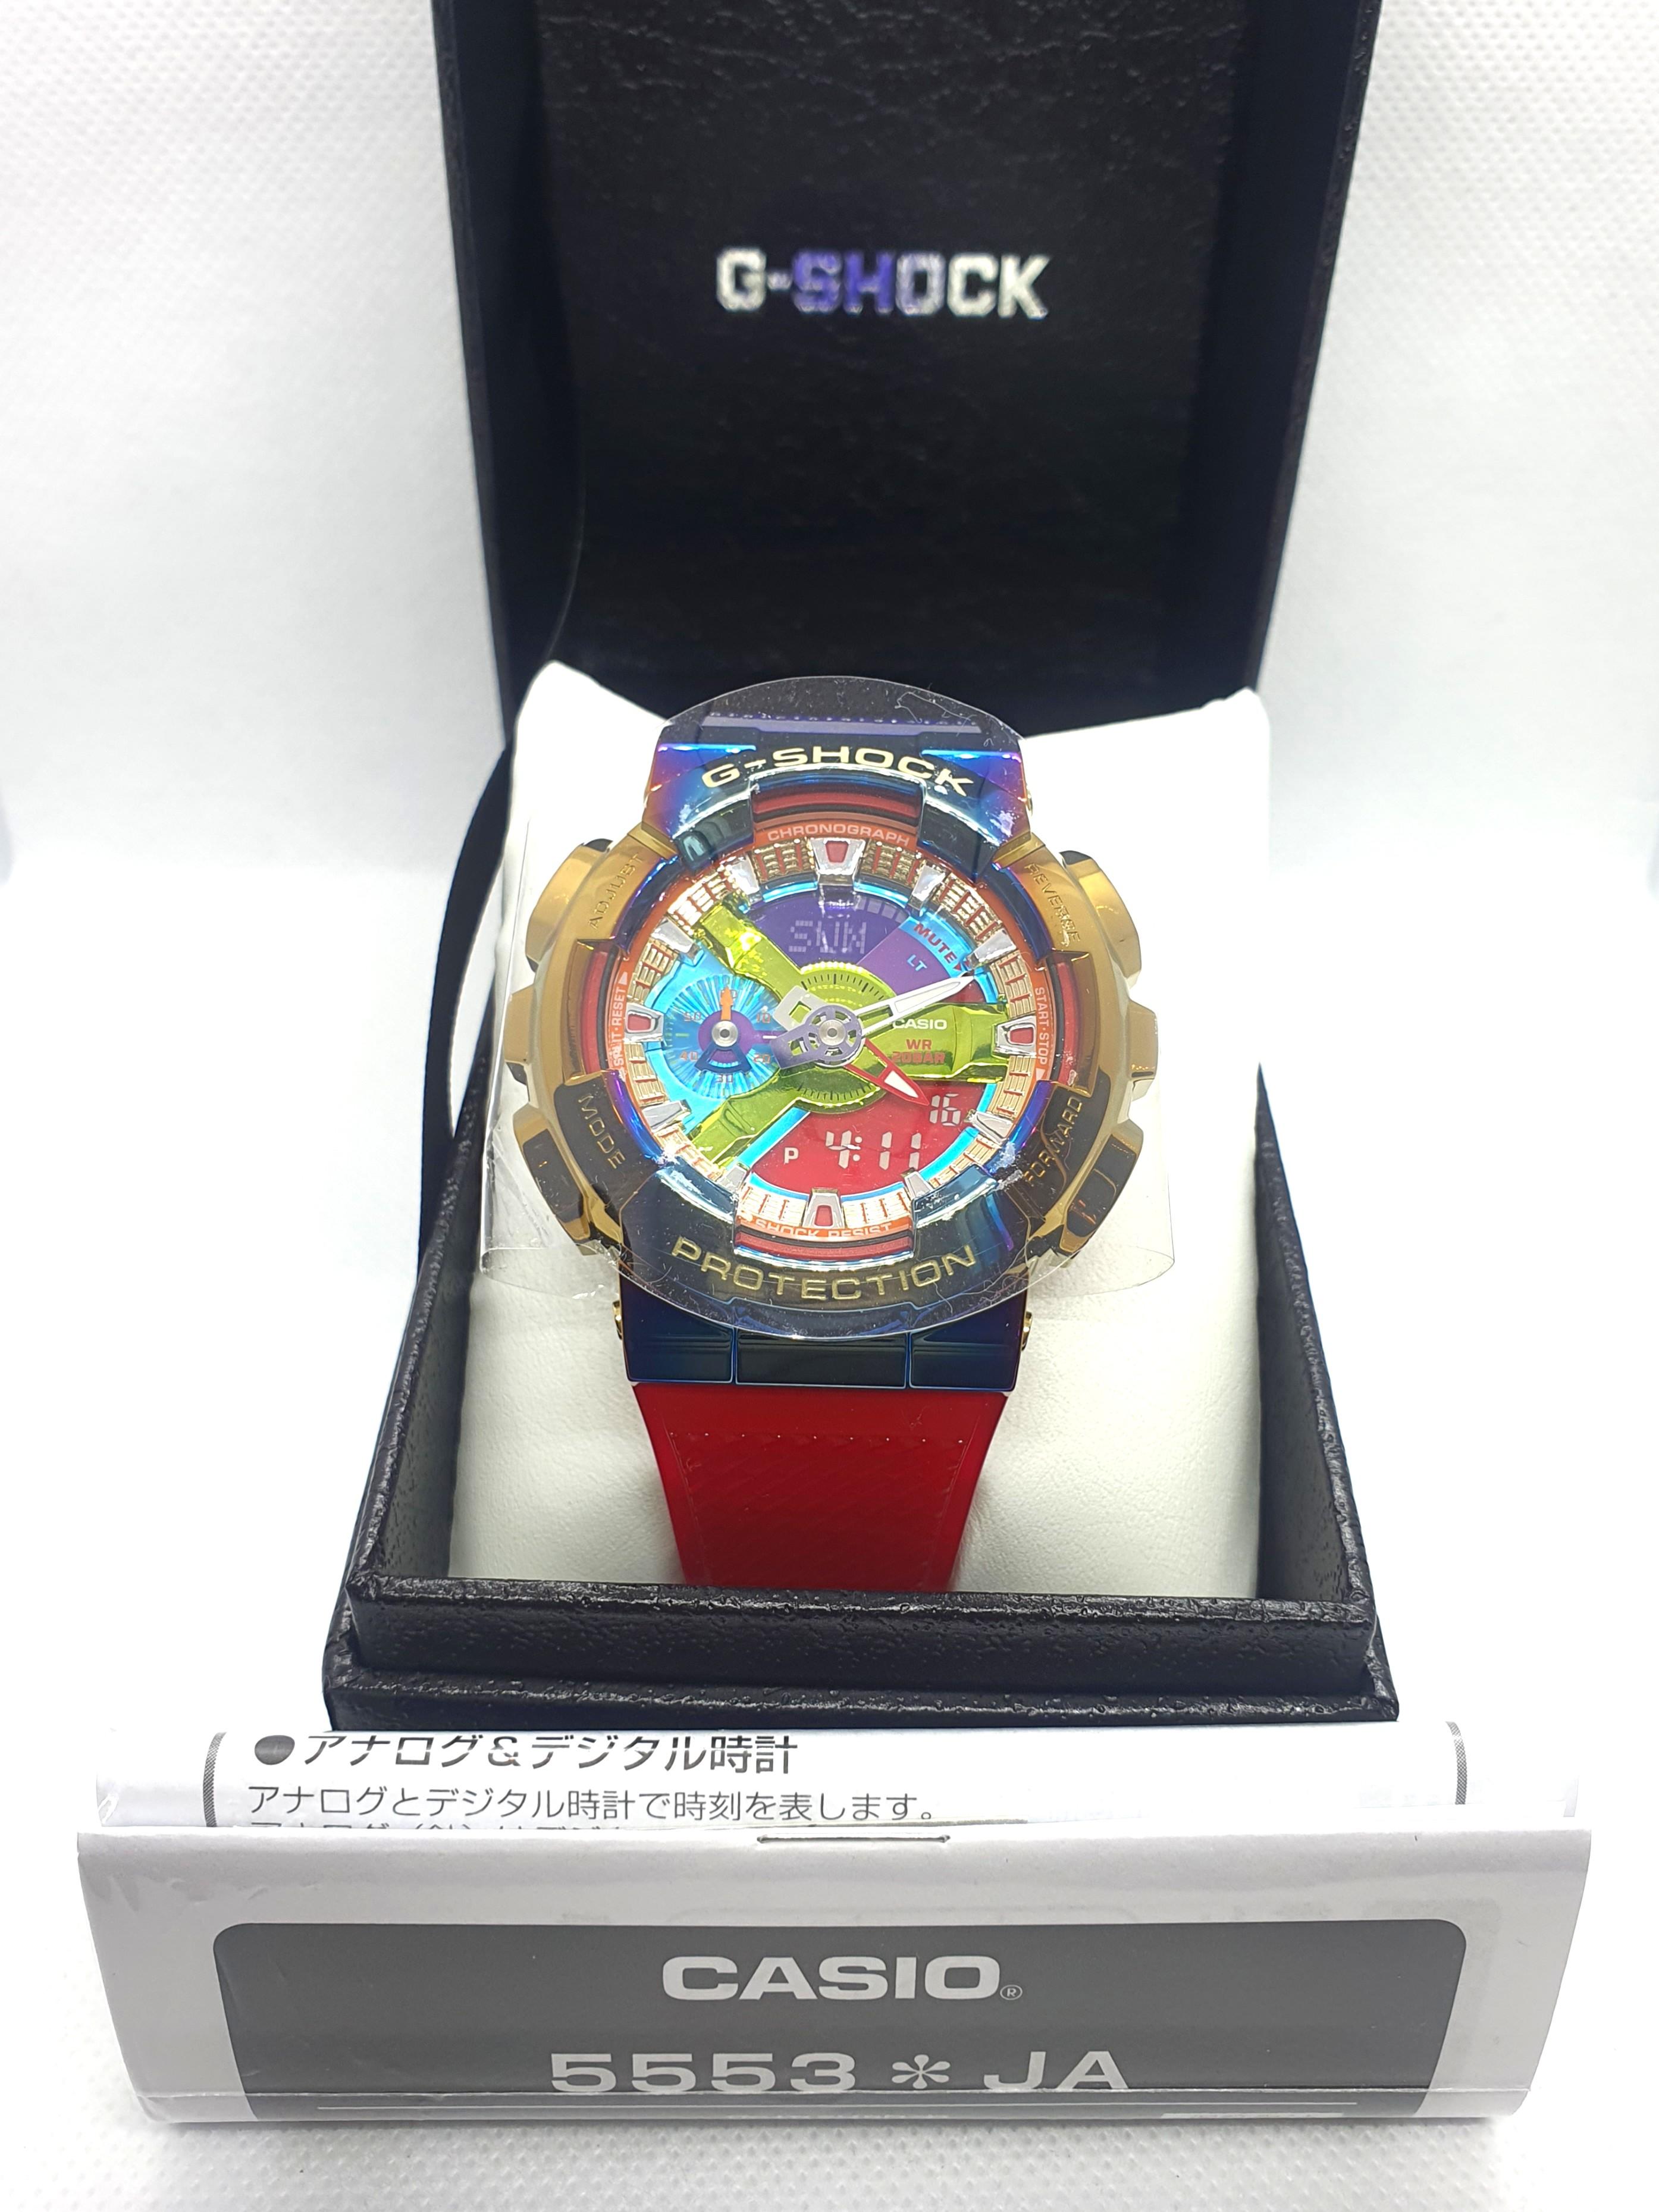 🔥 💯 Authentic ⚠️ CASIO G-SHOCK / GSHOCK x GM-110RB-2JF WITH